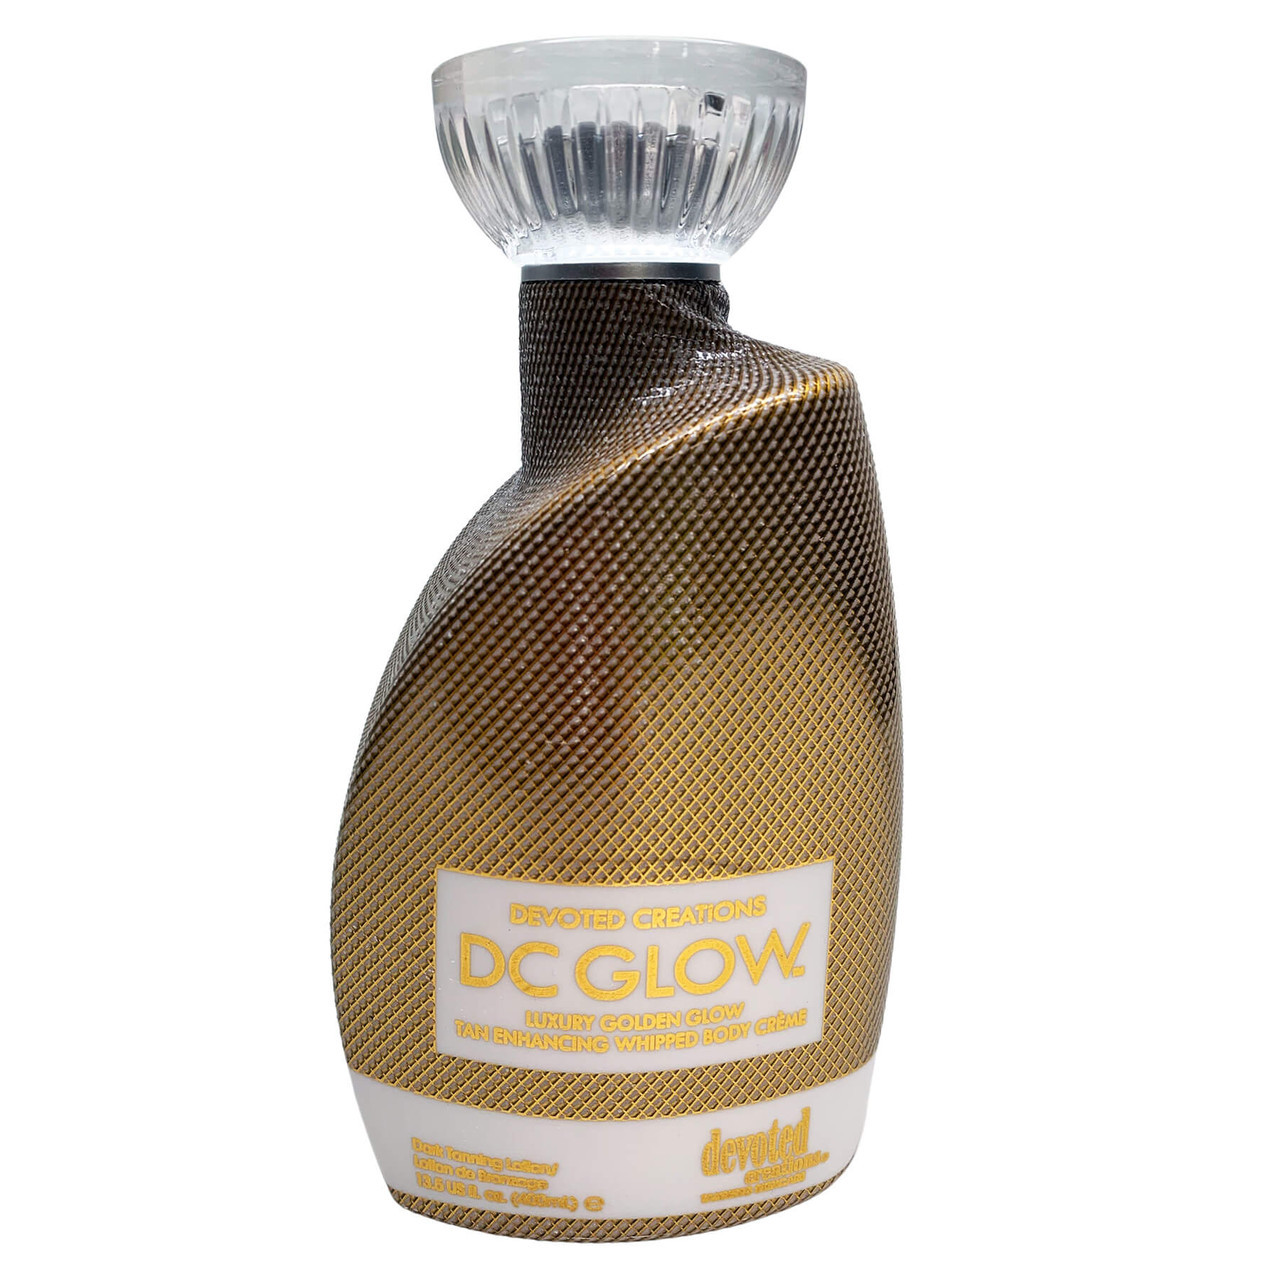 Devoted Creations DC Glow Luxury Golden Glow Tan Enhancing Whipped Body Crème - 13.5 oz.